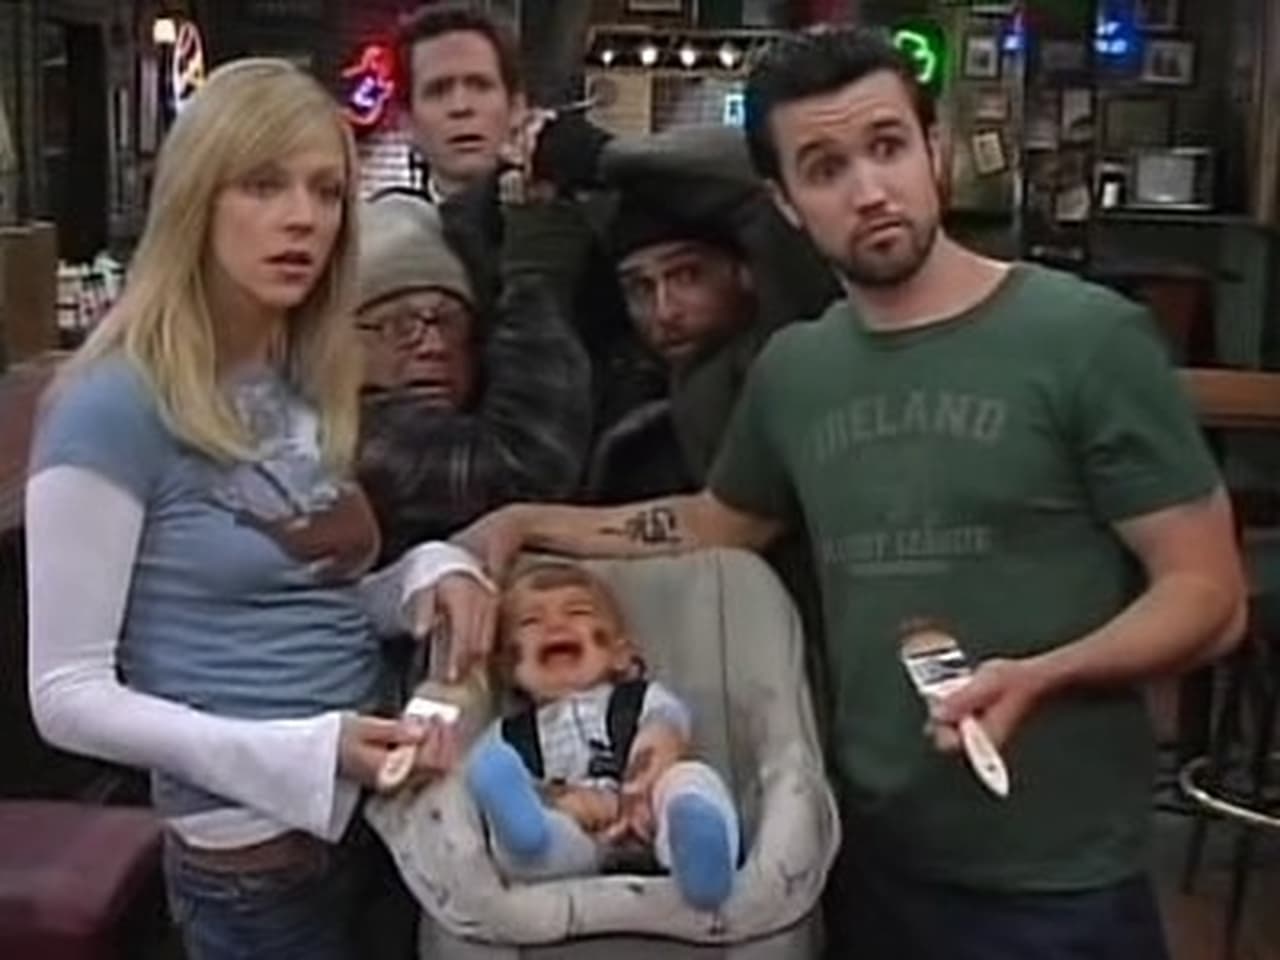 It's Always Sunny in Philadelphia - Season 3 Episode 1 : The Gang Finds a Dumpster Baby